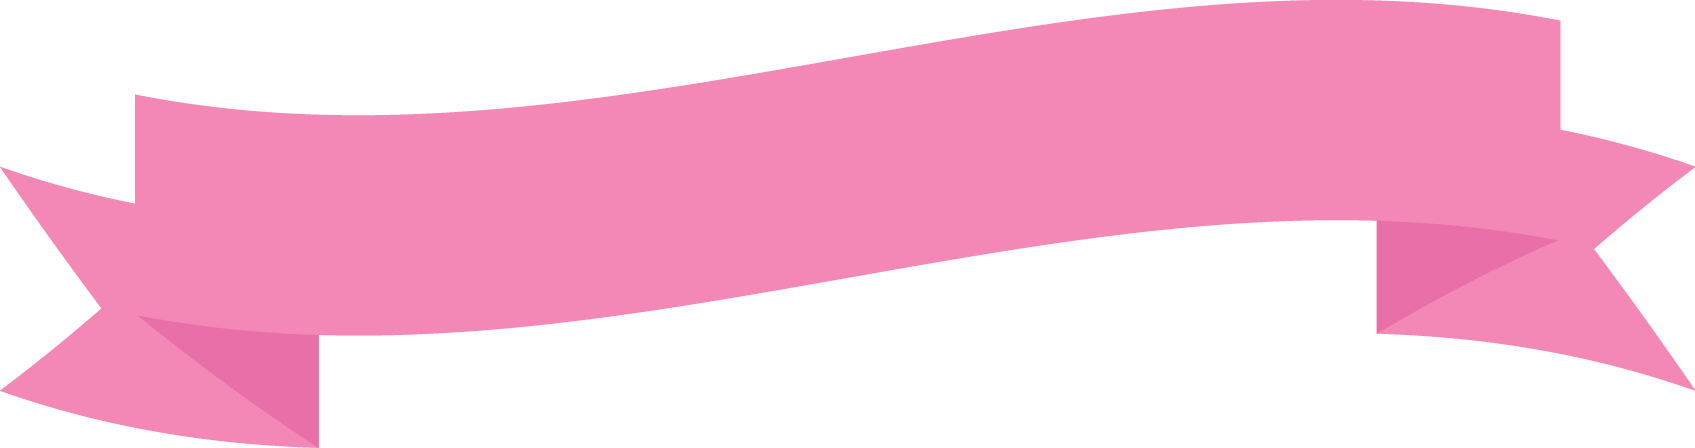 Pink Ribbon Banner Graphic PNG